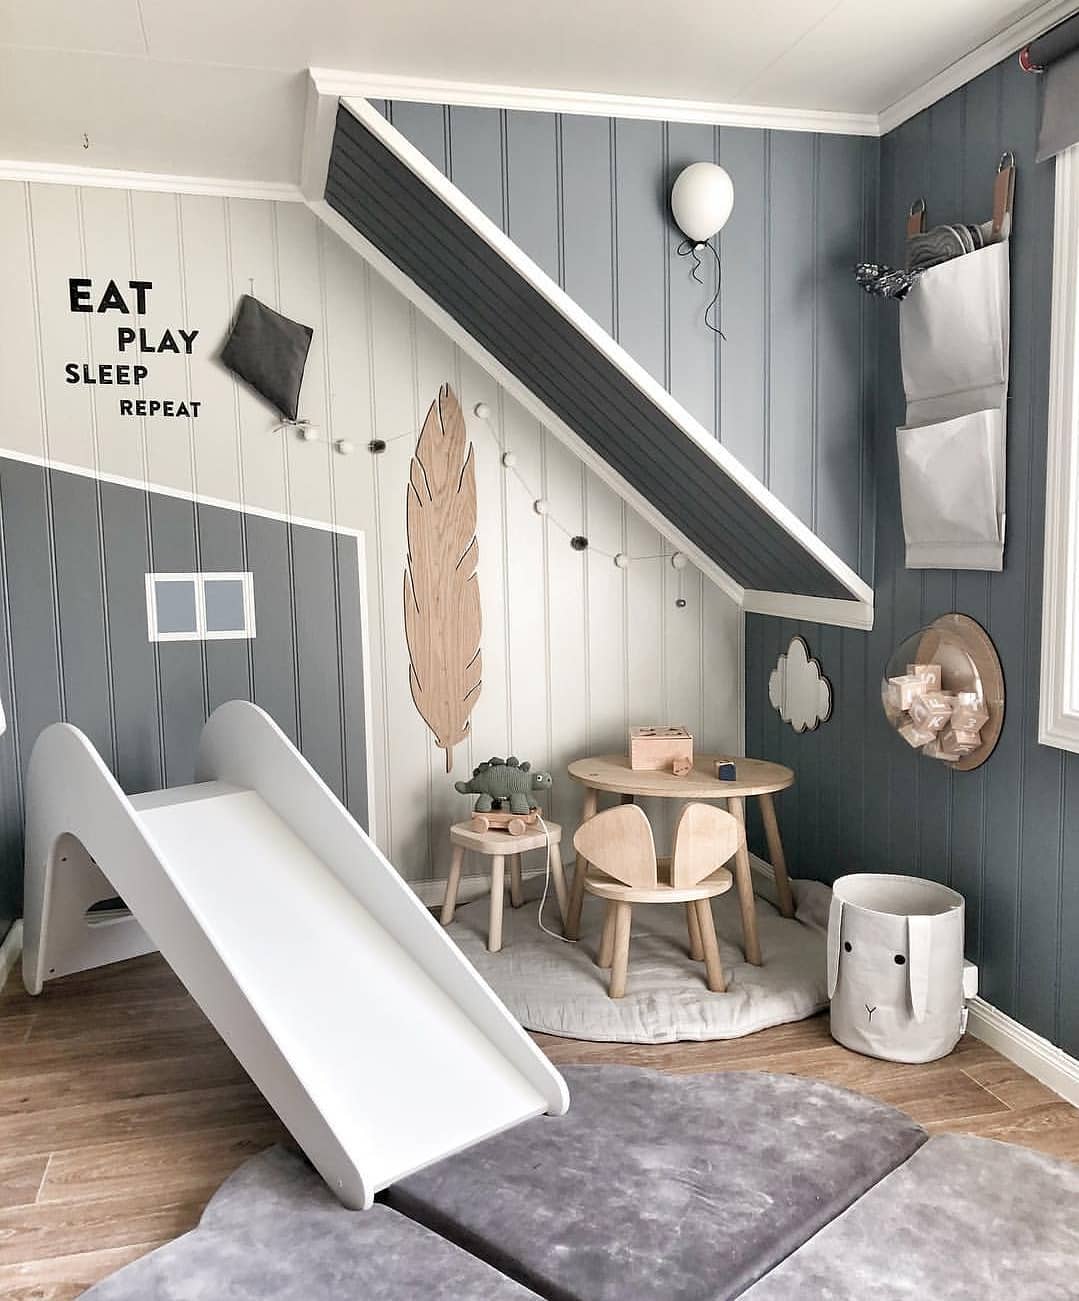 Grey kids room with fuzzy rug and white slide. Photo by Instagram user @jupiduu_original